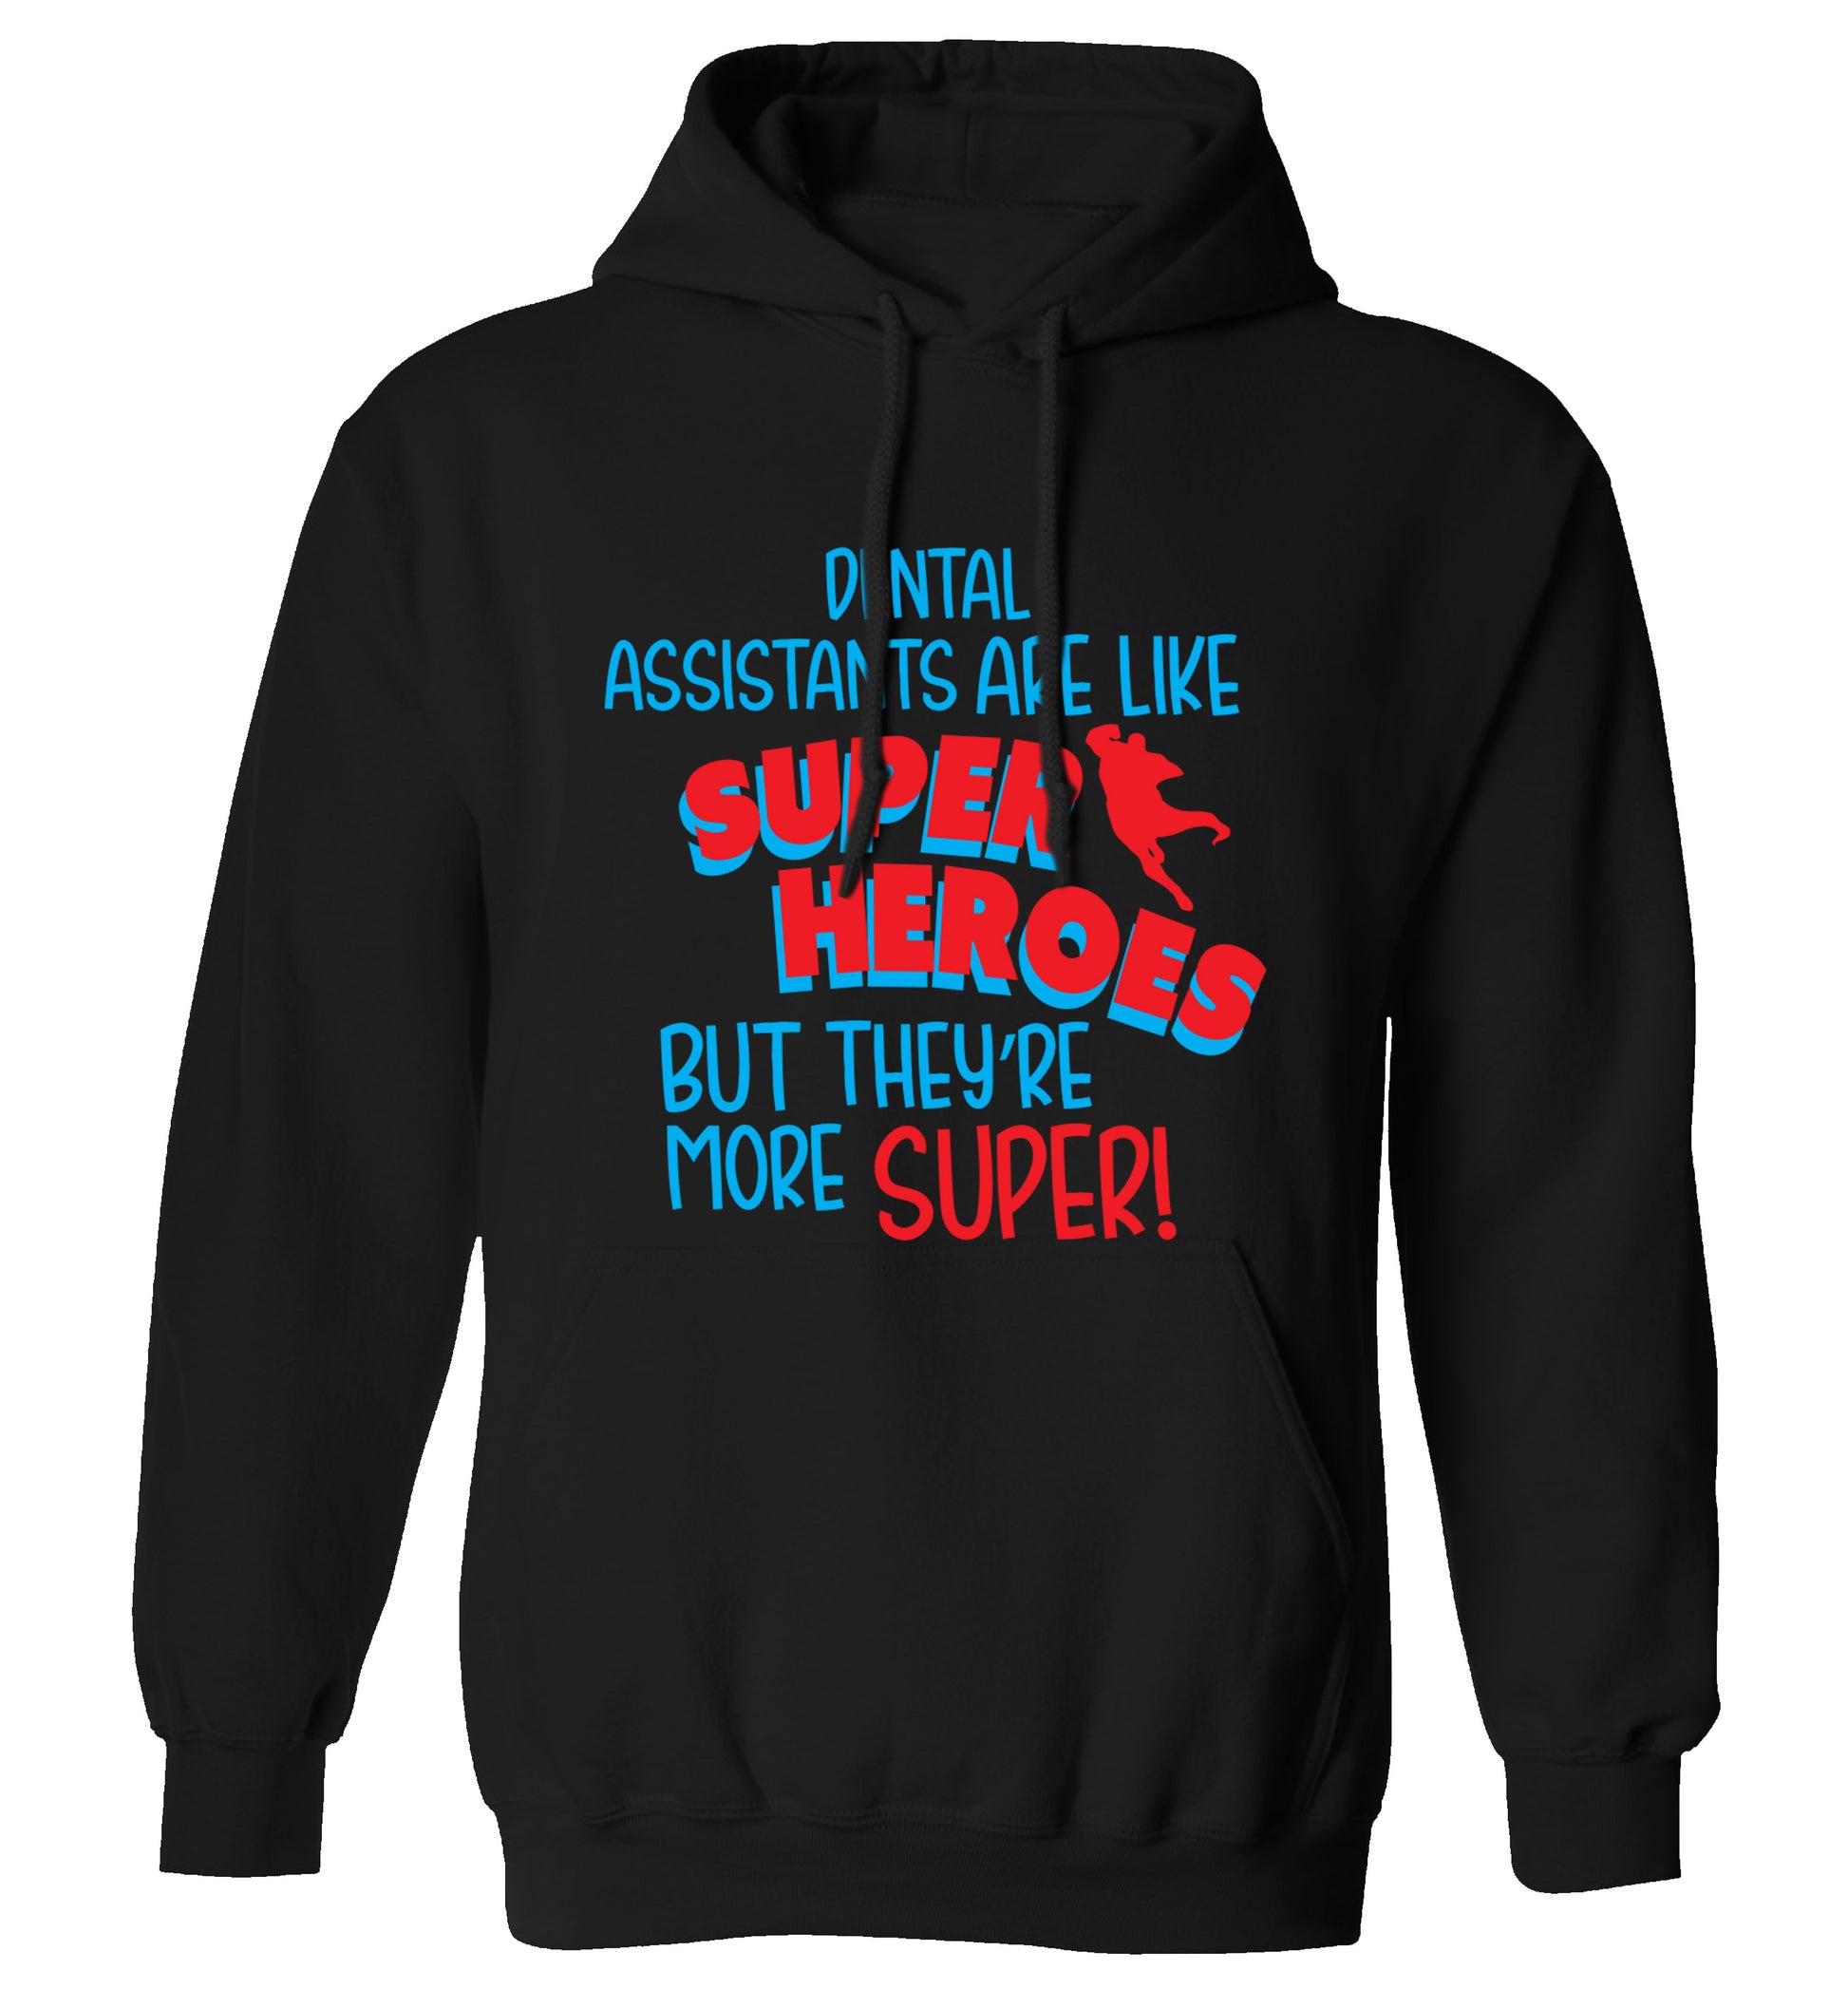 Dental Assistants are like superheros but they're more super adults unisex black hoodie 2XL